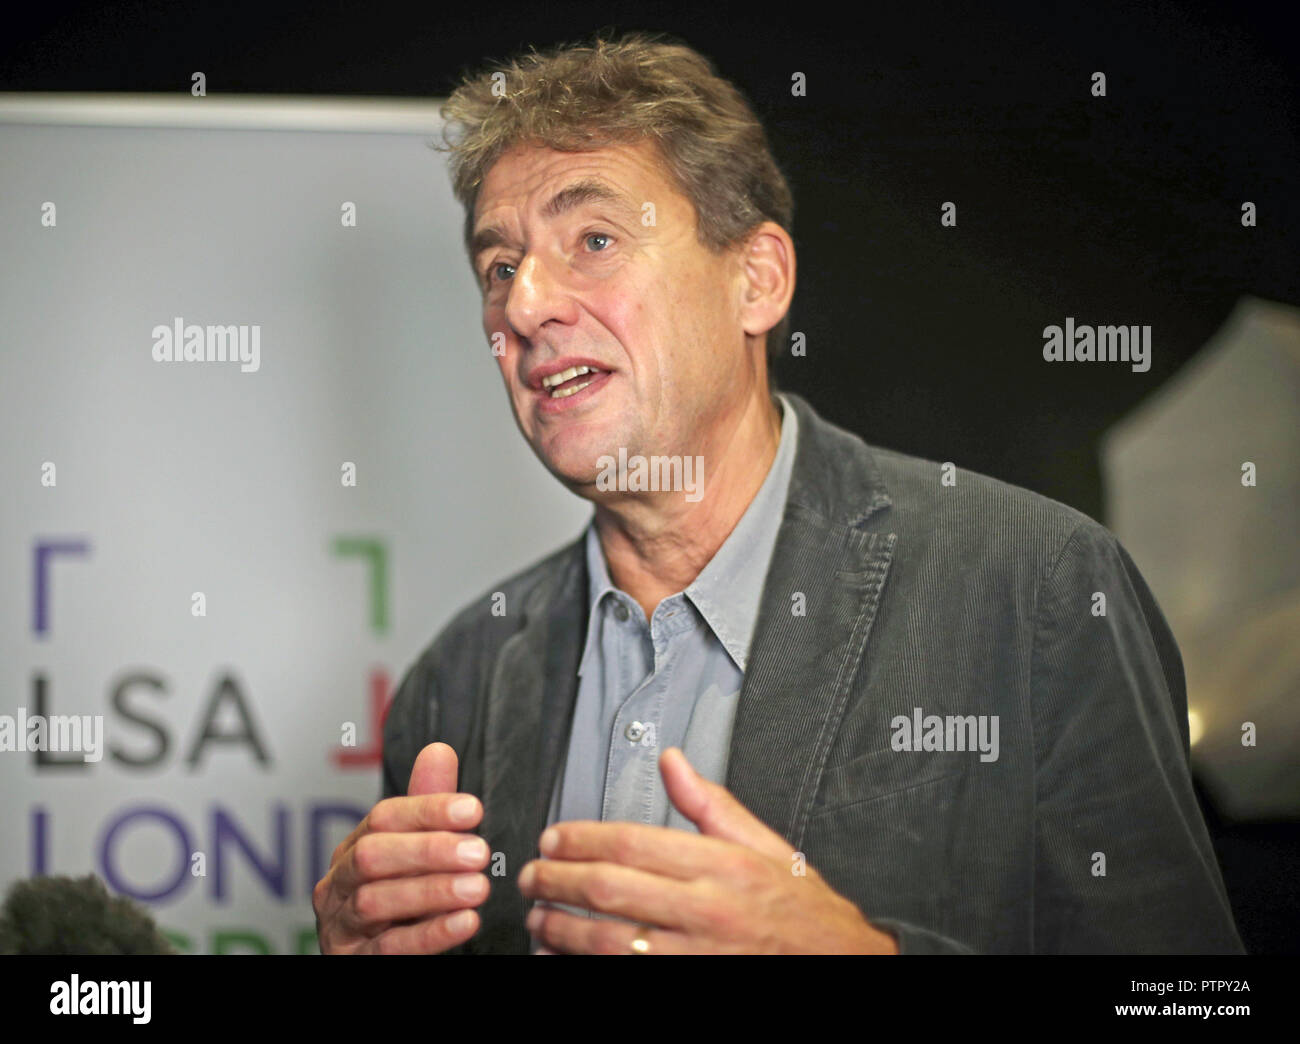 Tim Bevan speaks to media at the opening of the London Screen Academy (LSA) at Screen on the Green cinema, London. Stock Photo